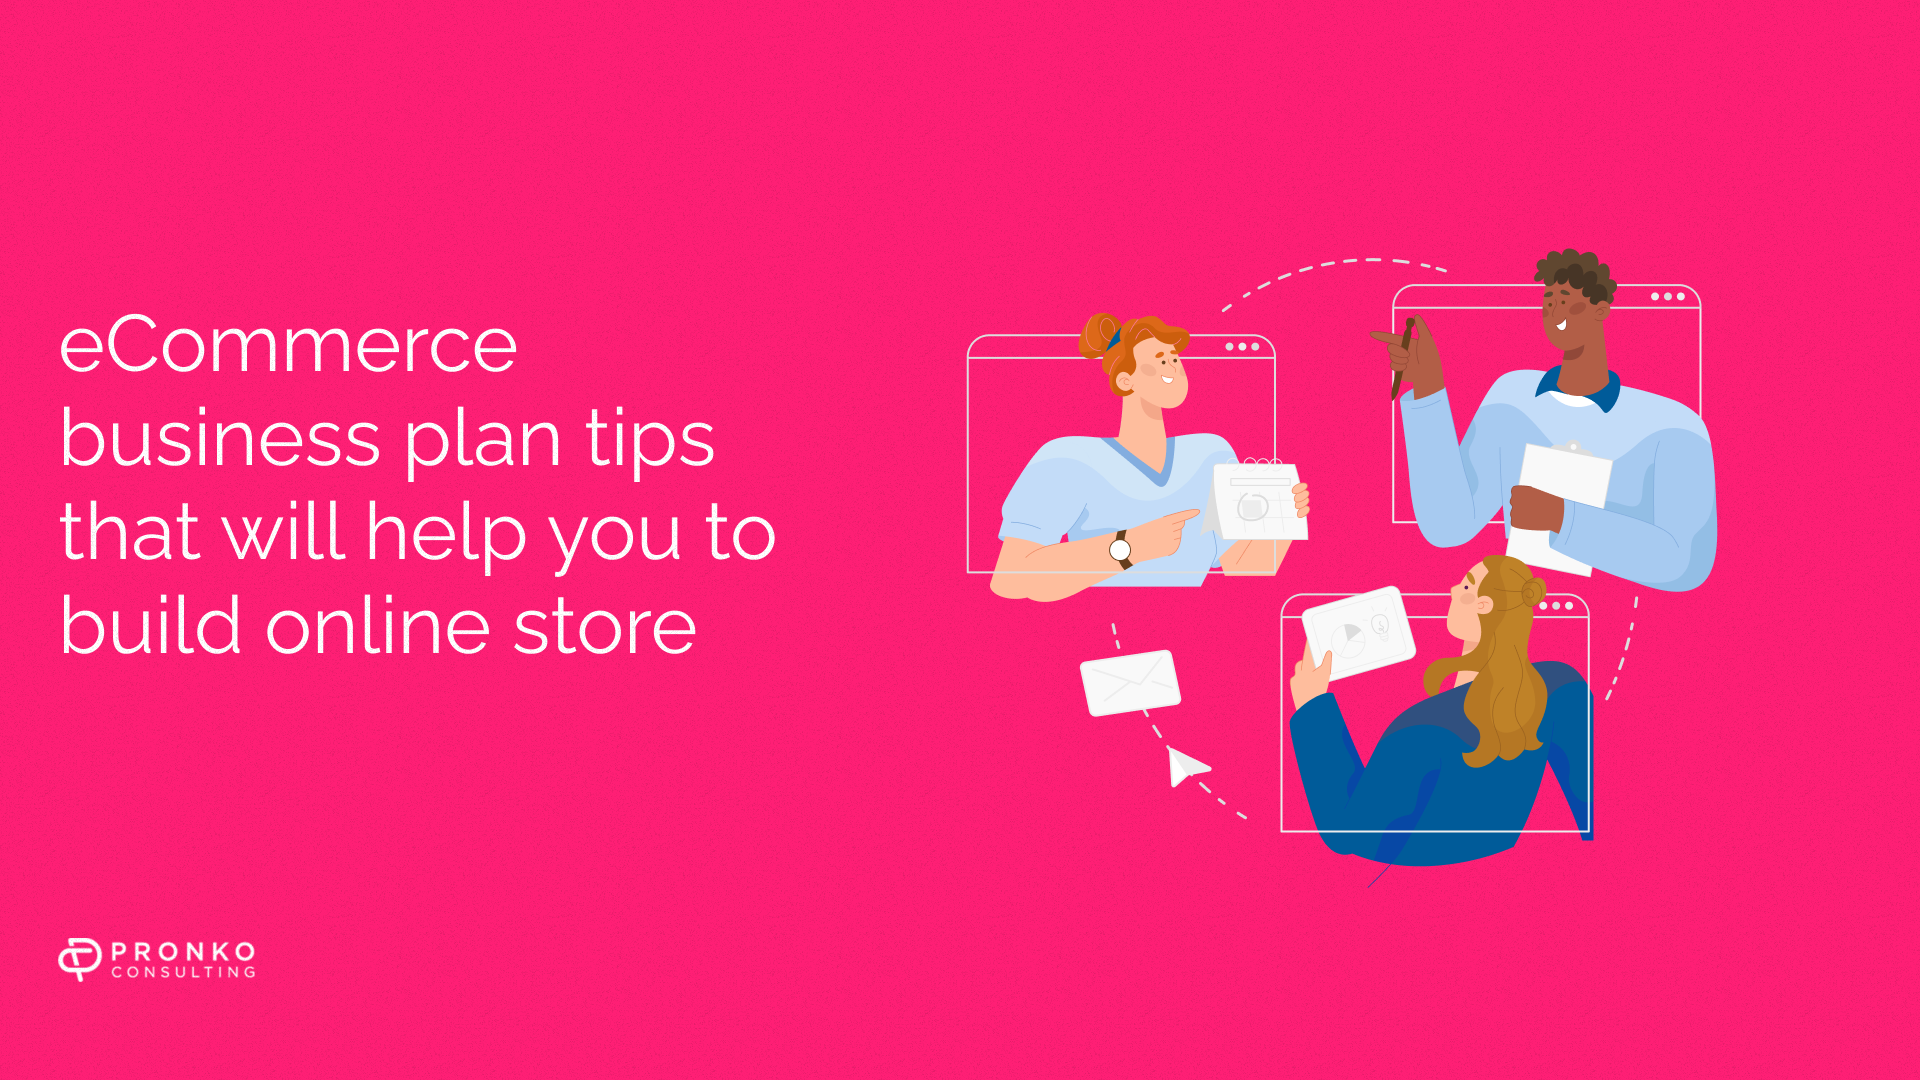 How to write a business plan for an online store: step-by-step instructions